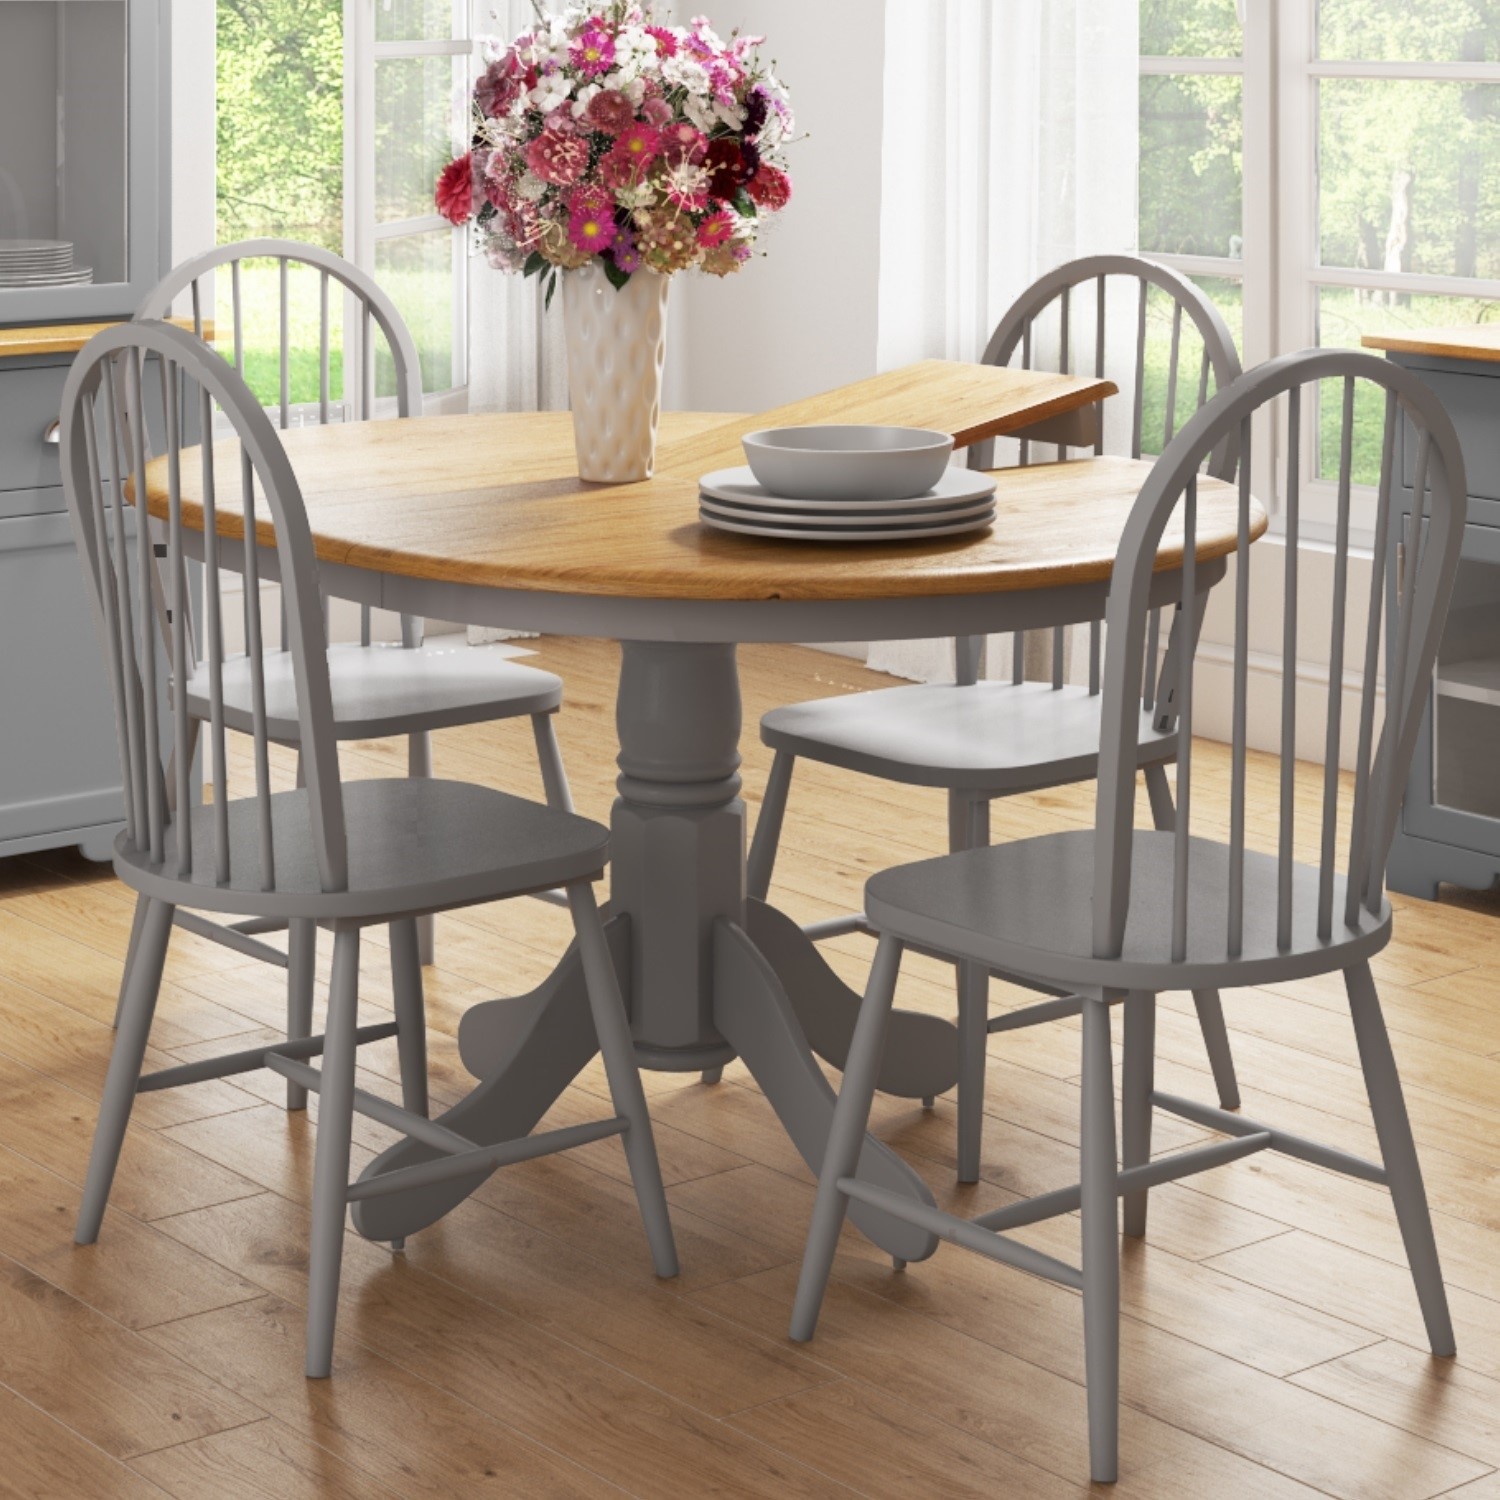 Round Extendable Dining Table Set With, Round Extendable Dining Room Table Sets